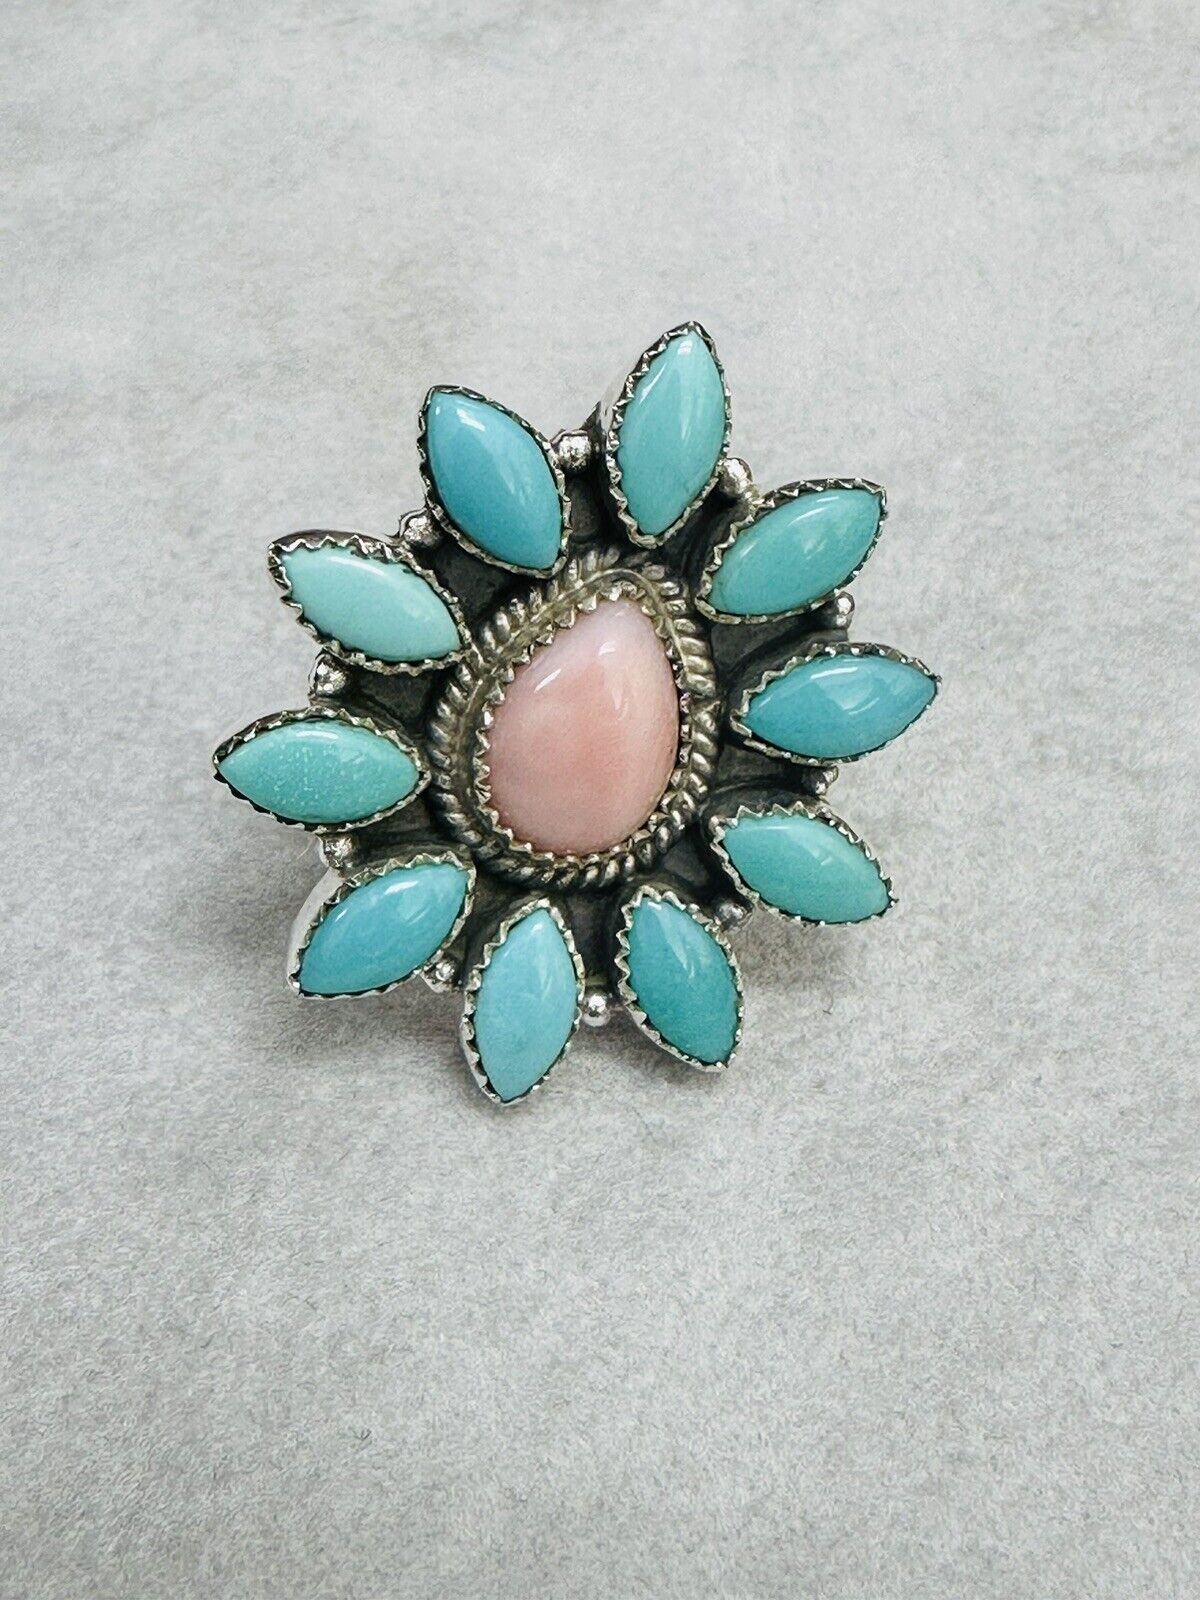 Turquoise And Pink Opal Natural Gemstone Ring Adjustable 925 Sterling Silver